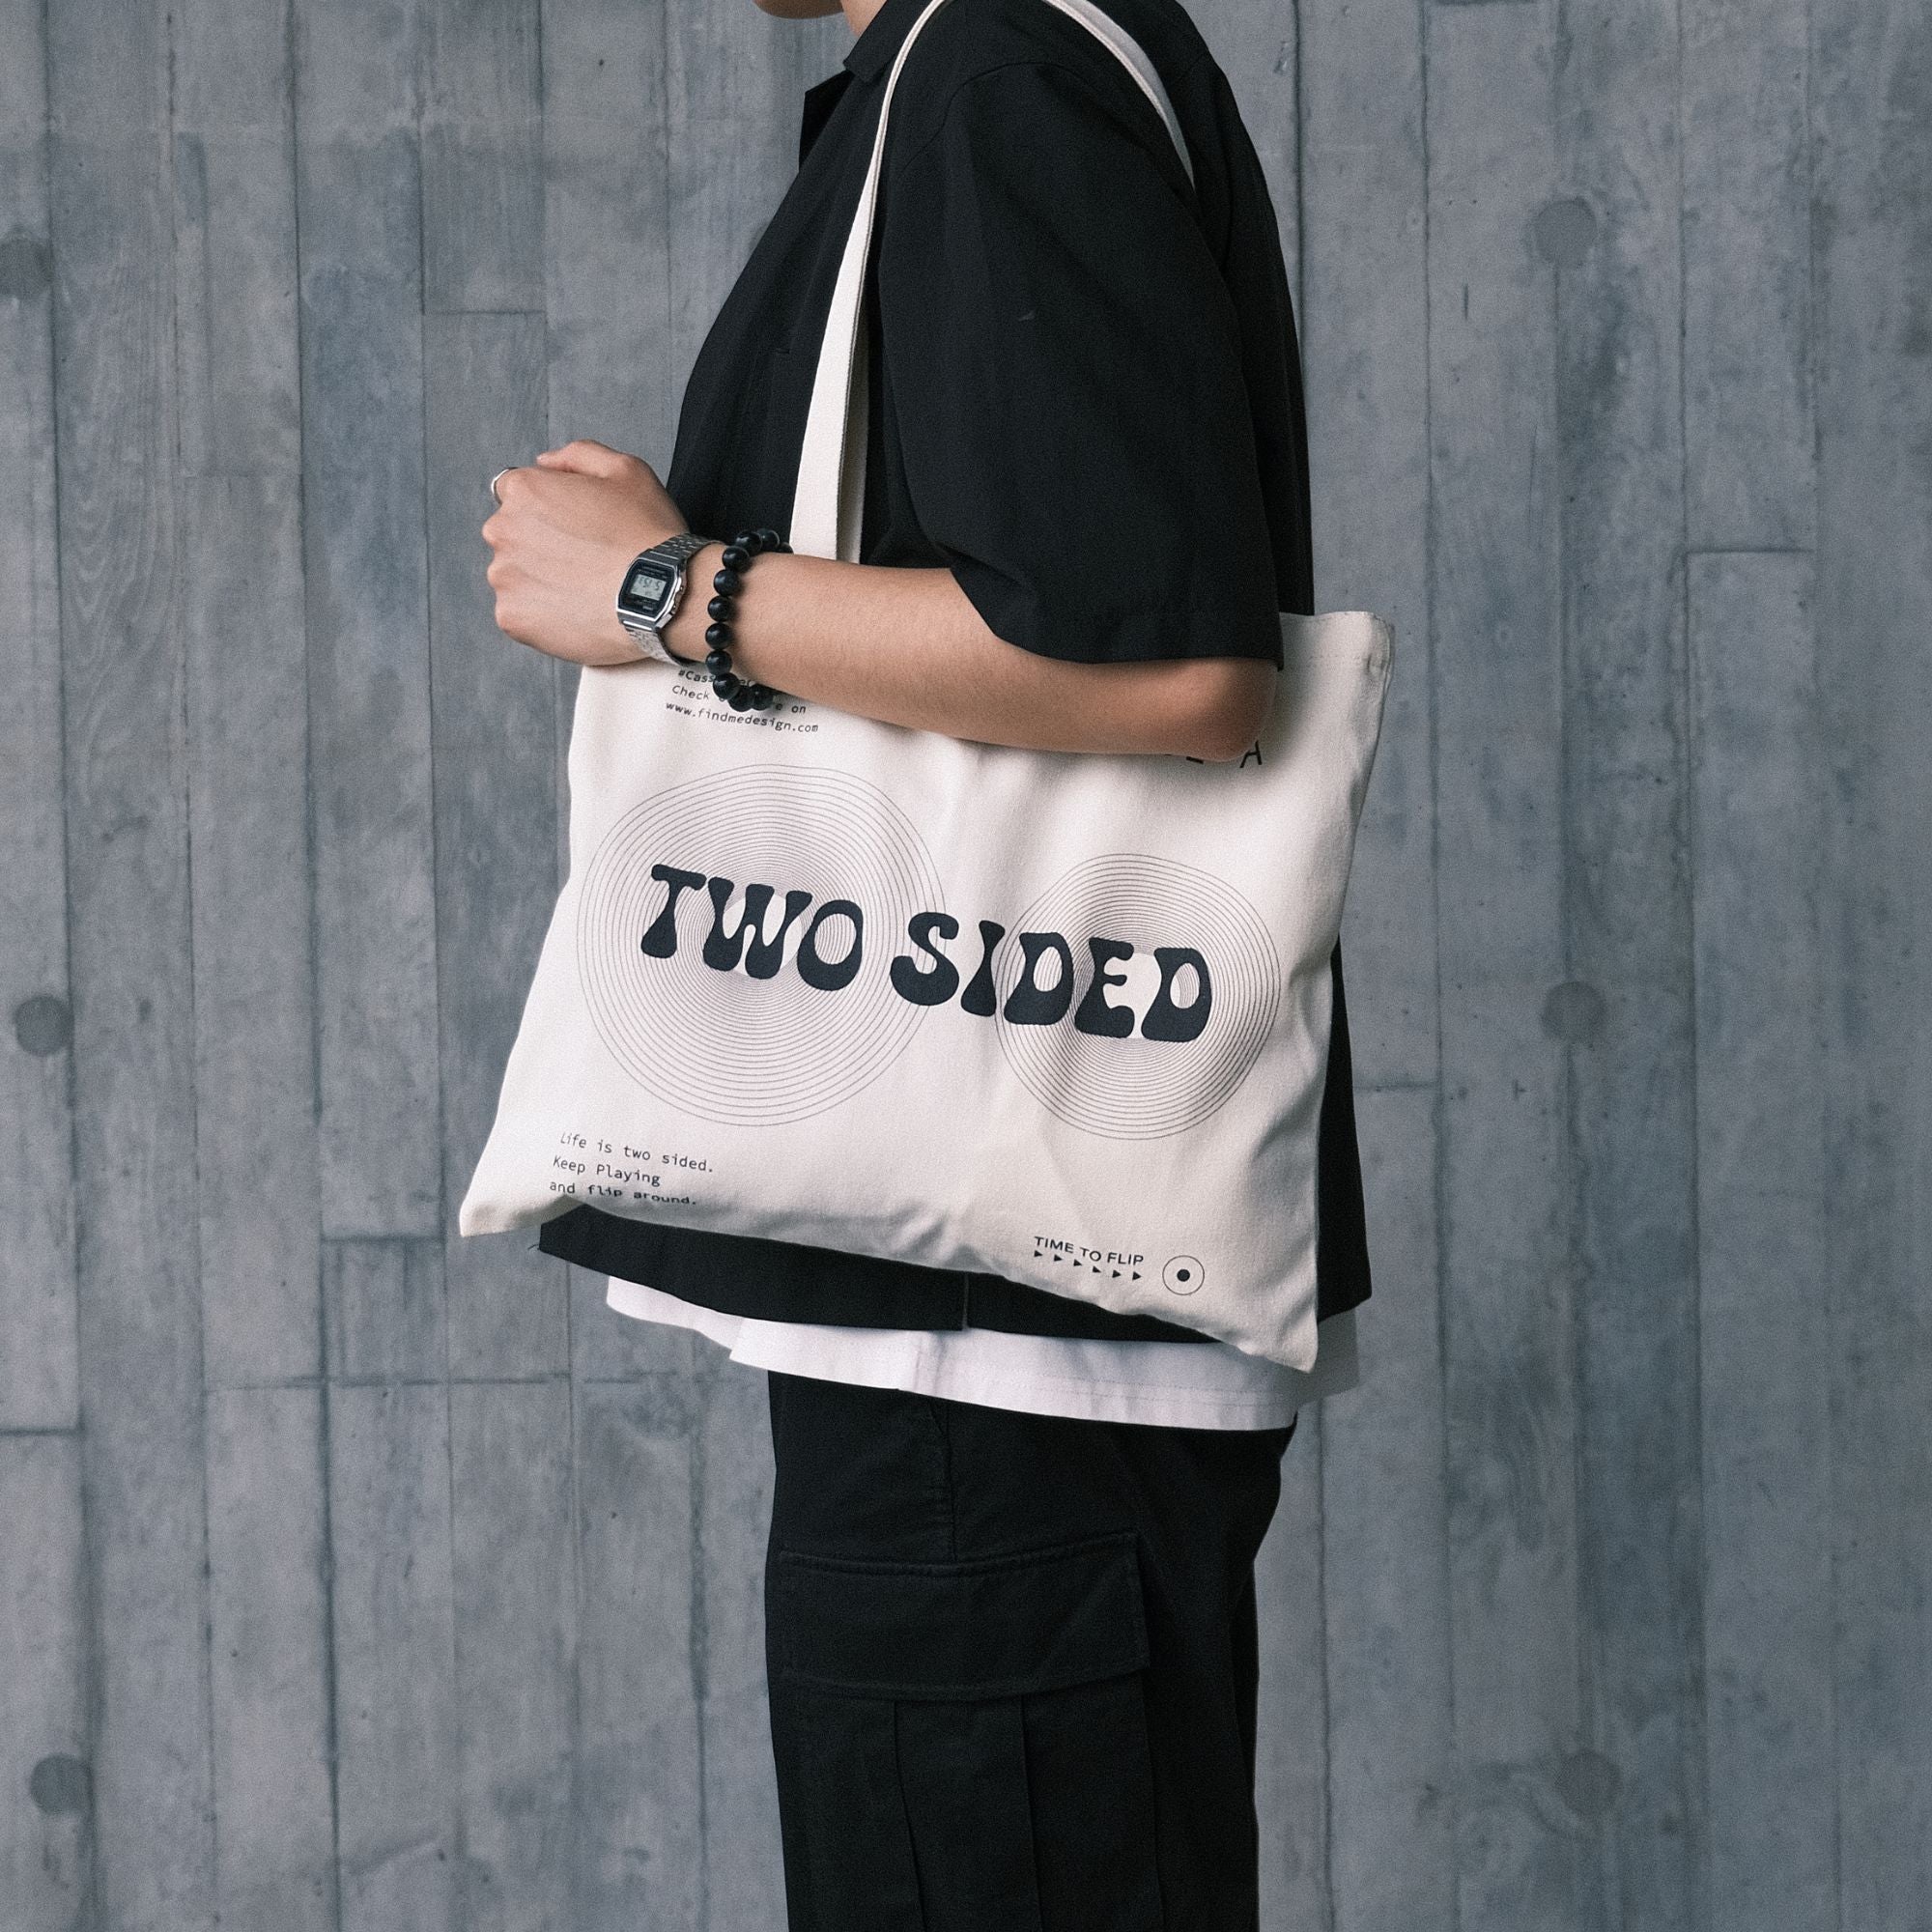 TWO SIDED | Tote Bag